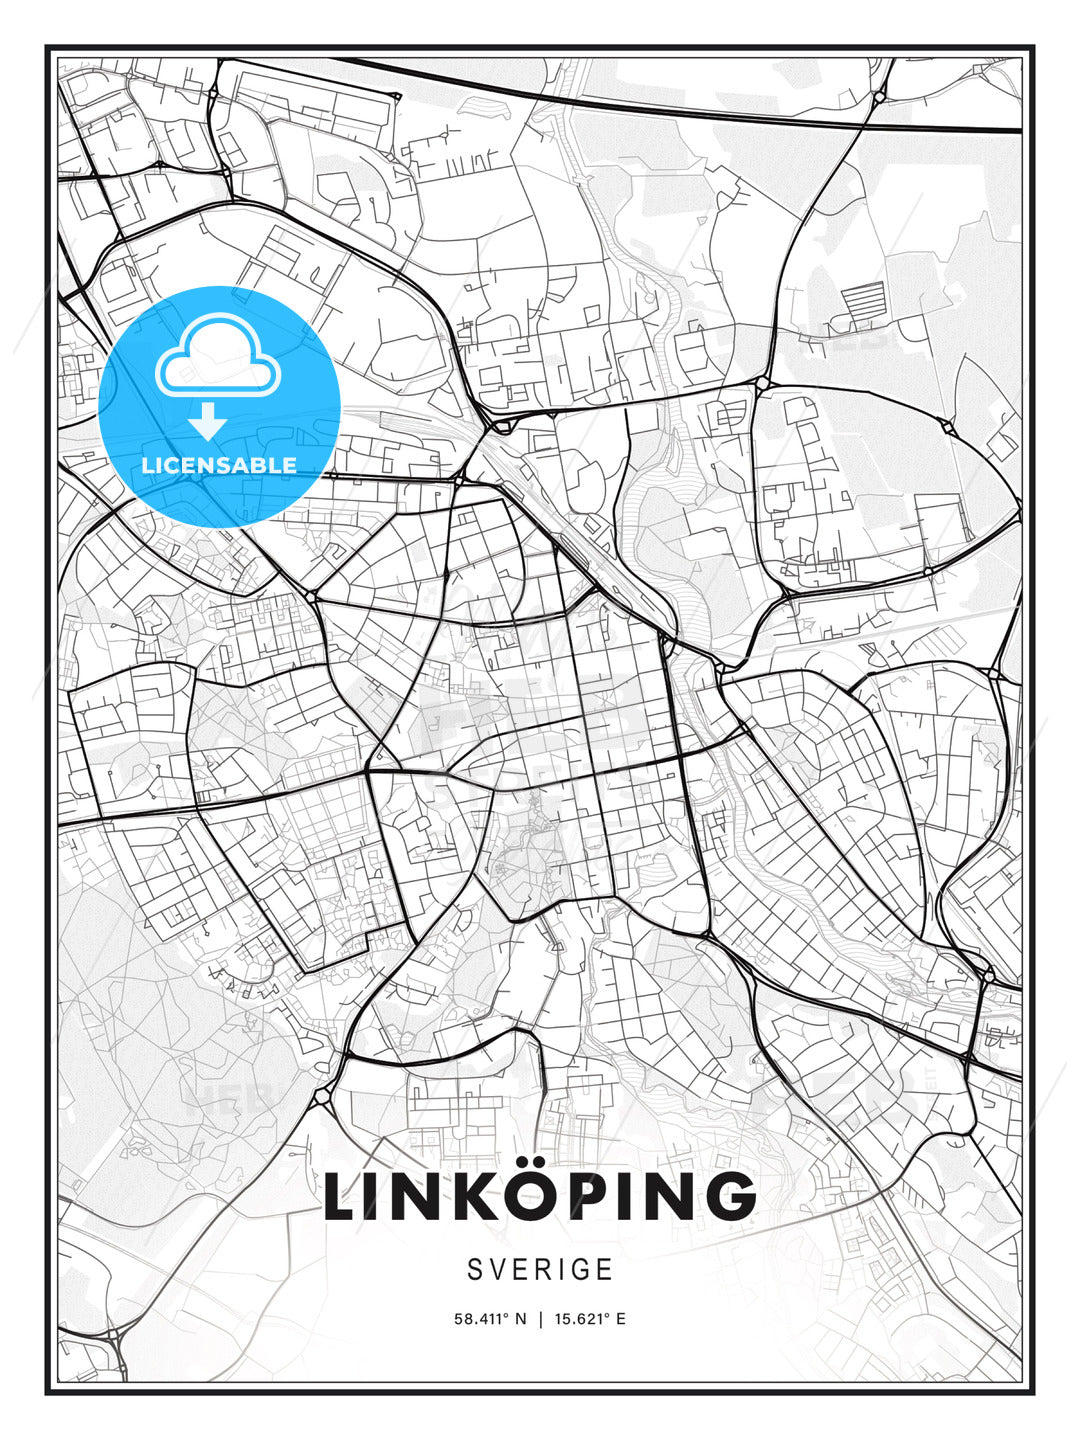 Linköping, Sweden, Modern Print Template in Various Formats - HEBSTREITS Sketches